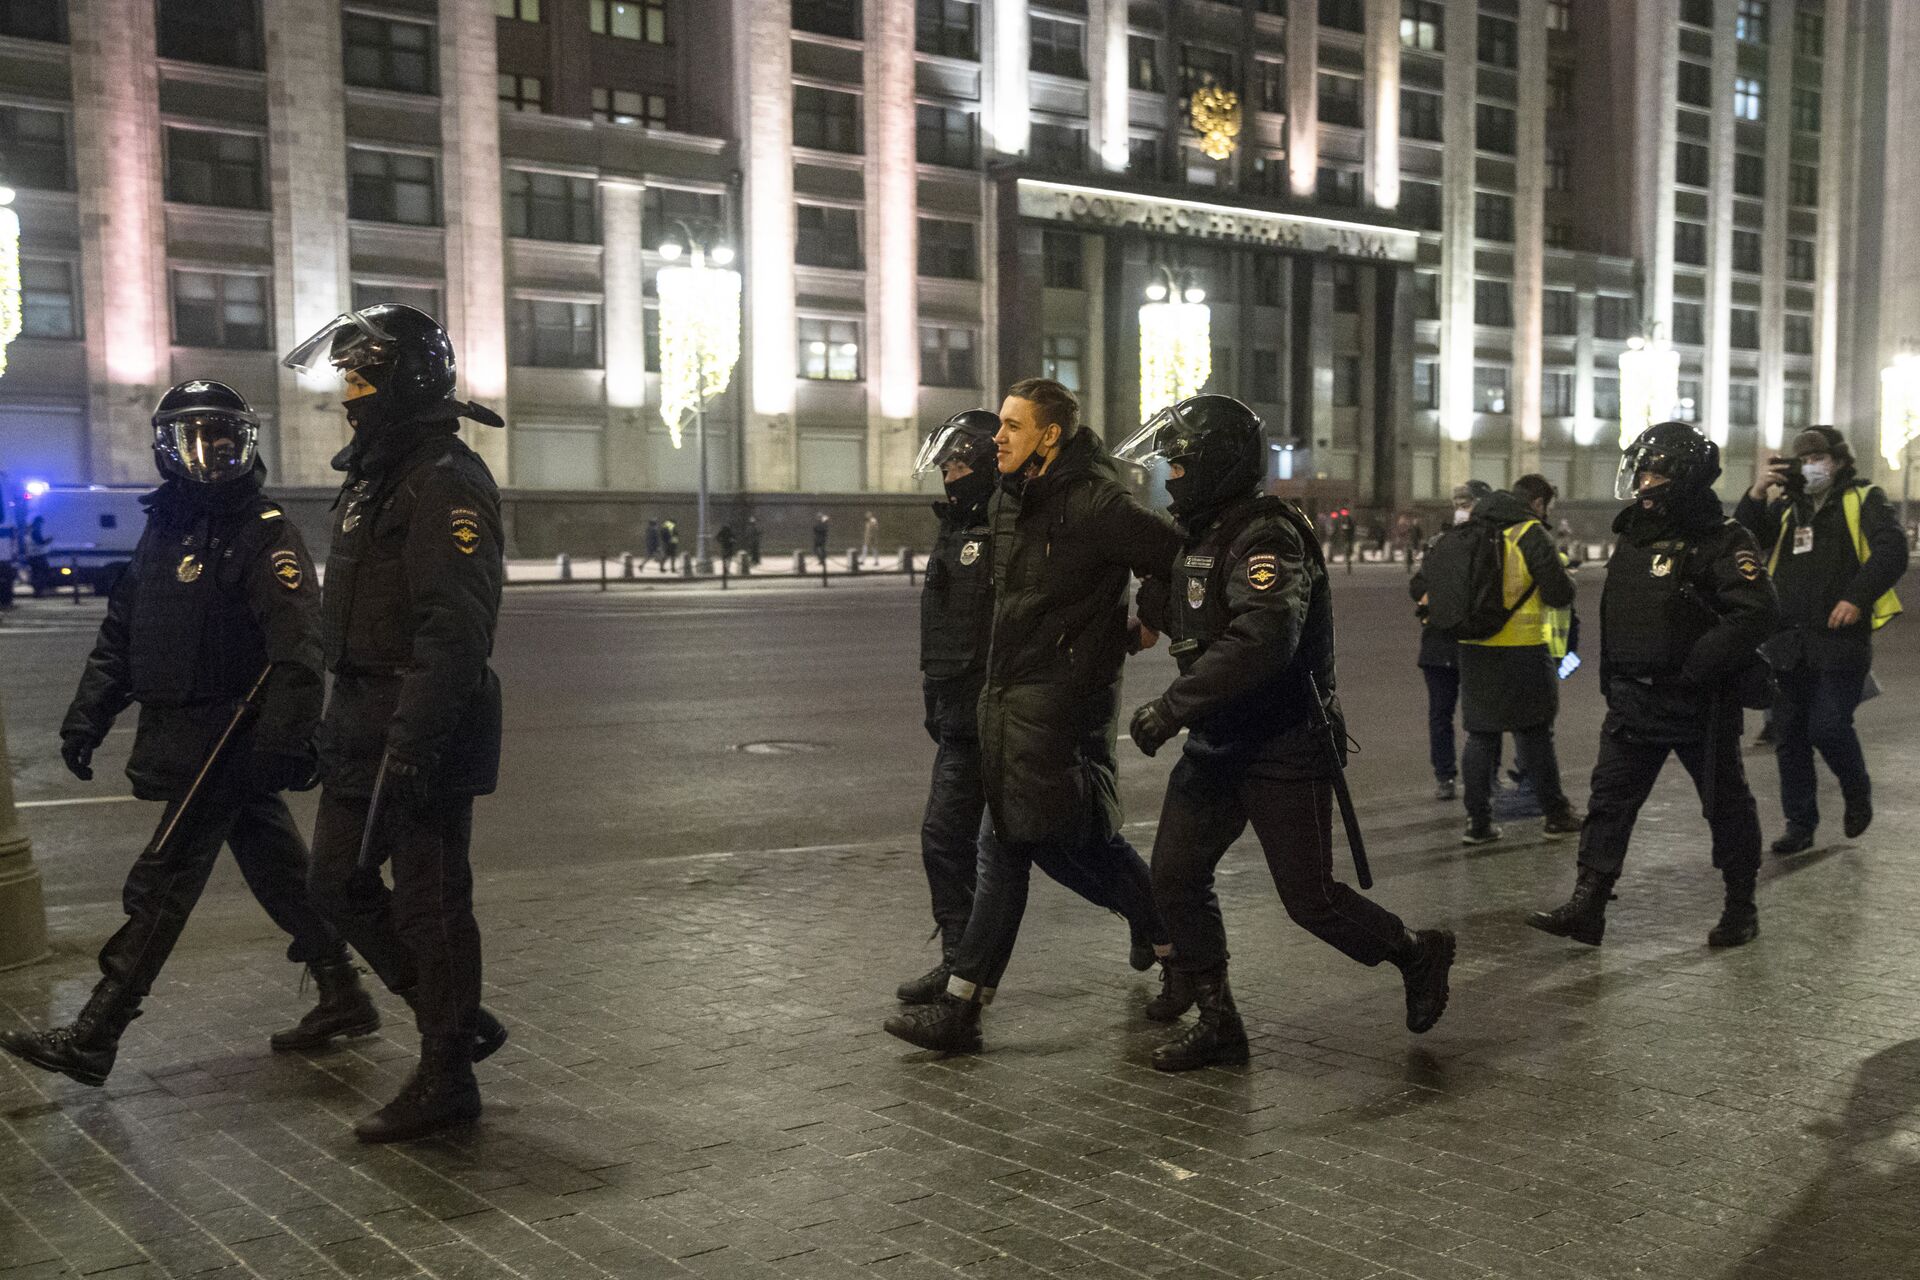 Russian Law Enforcement Officers Stop Unauthorized Protests in Downtown Moscow, Source Claims - Sputnik International, 1920, 02.02.2021